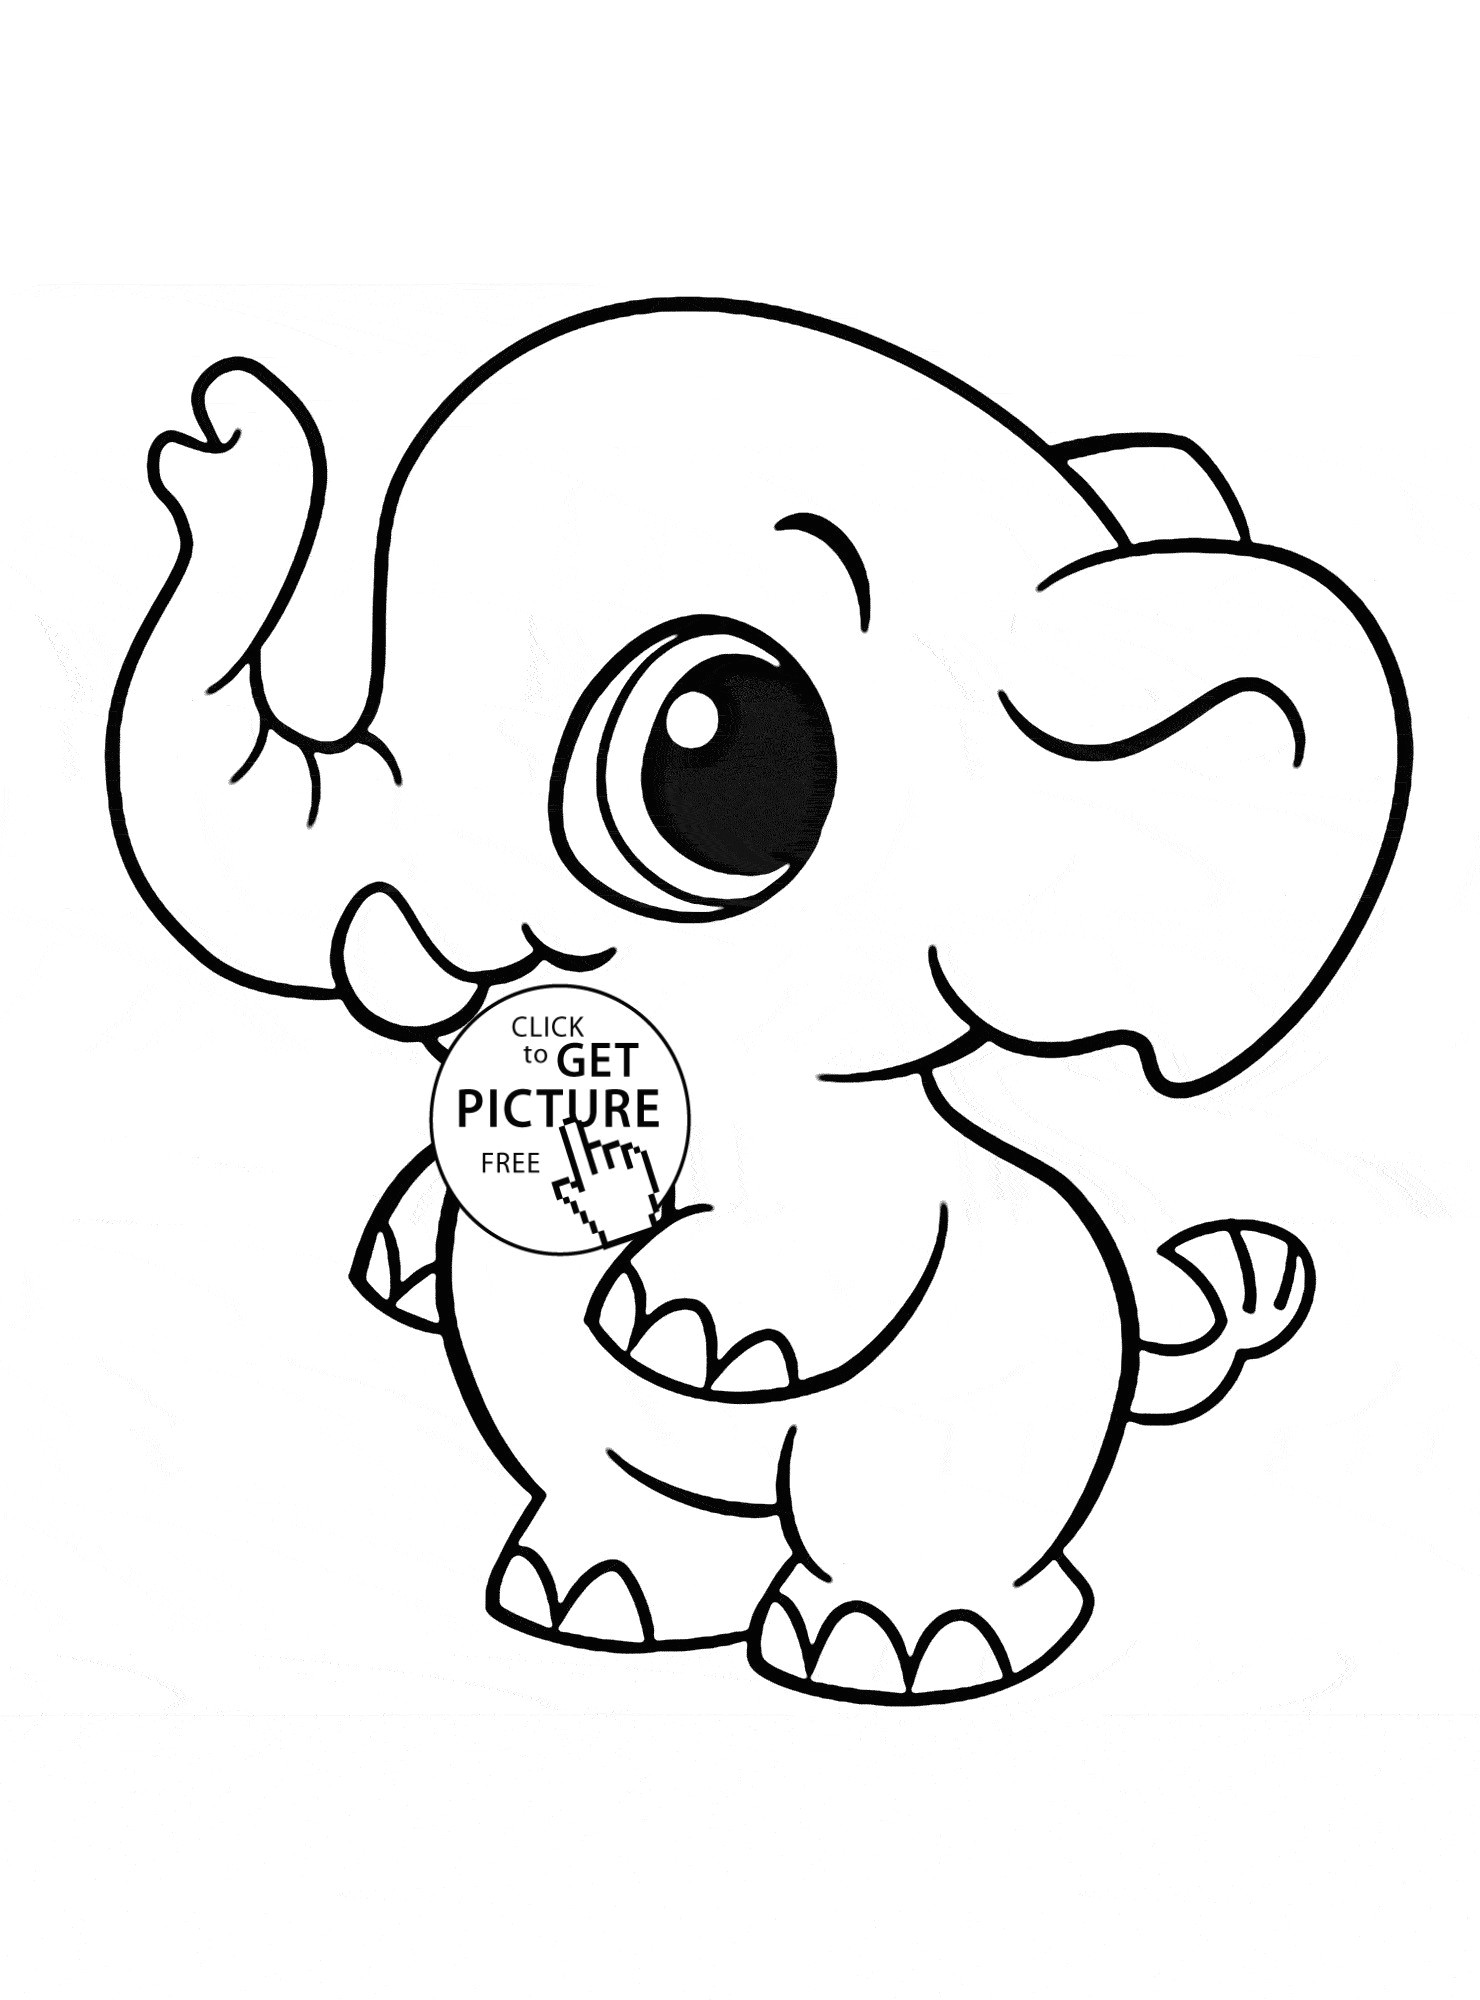 Easy Drawing Of Elephant Easy to Draw Fox Pet Coloring Sheet Fresh Fox Coloring Pages Elegant